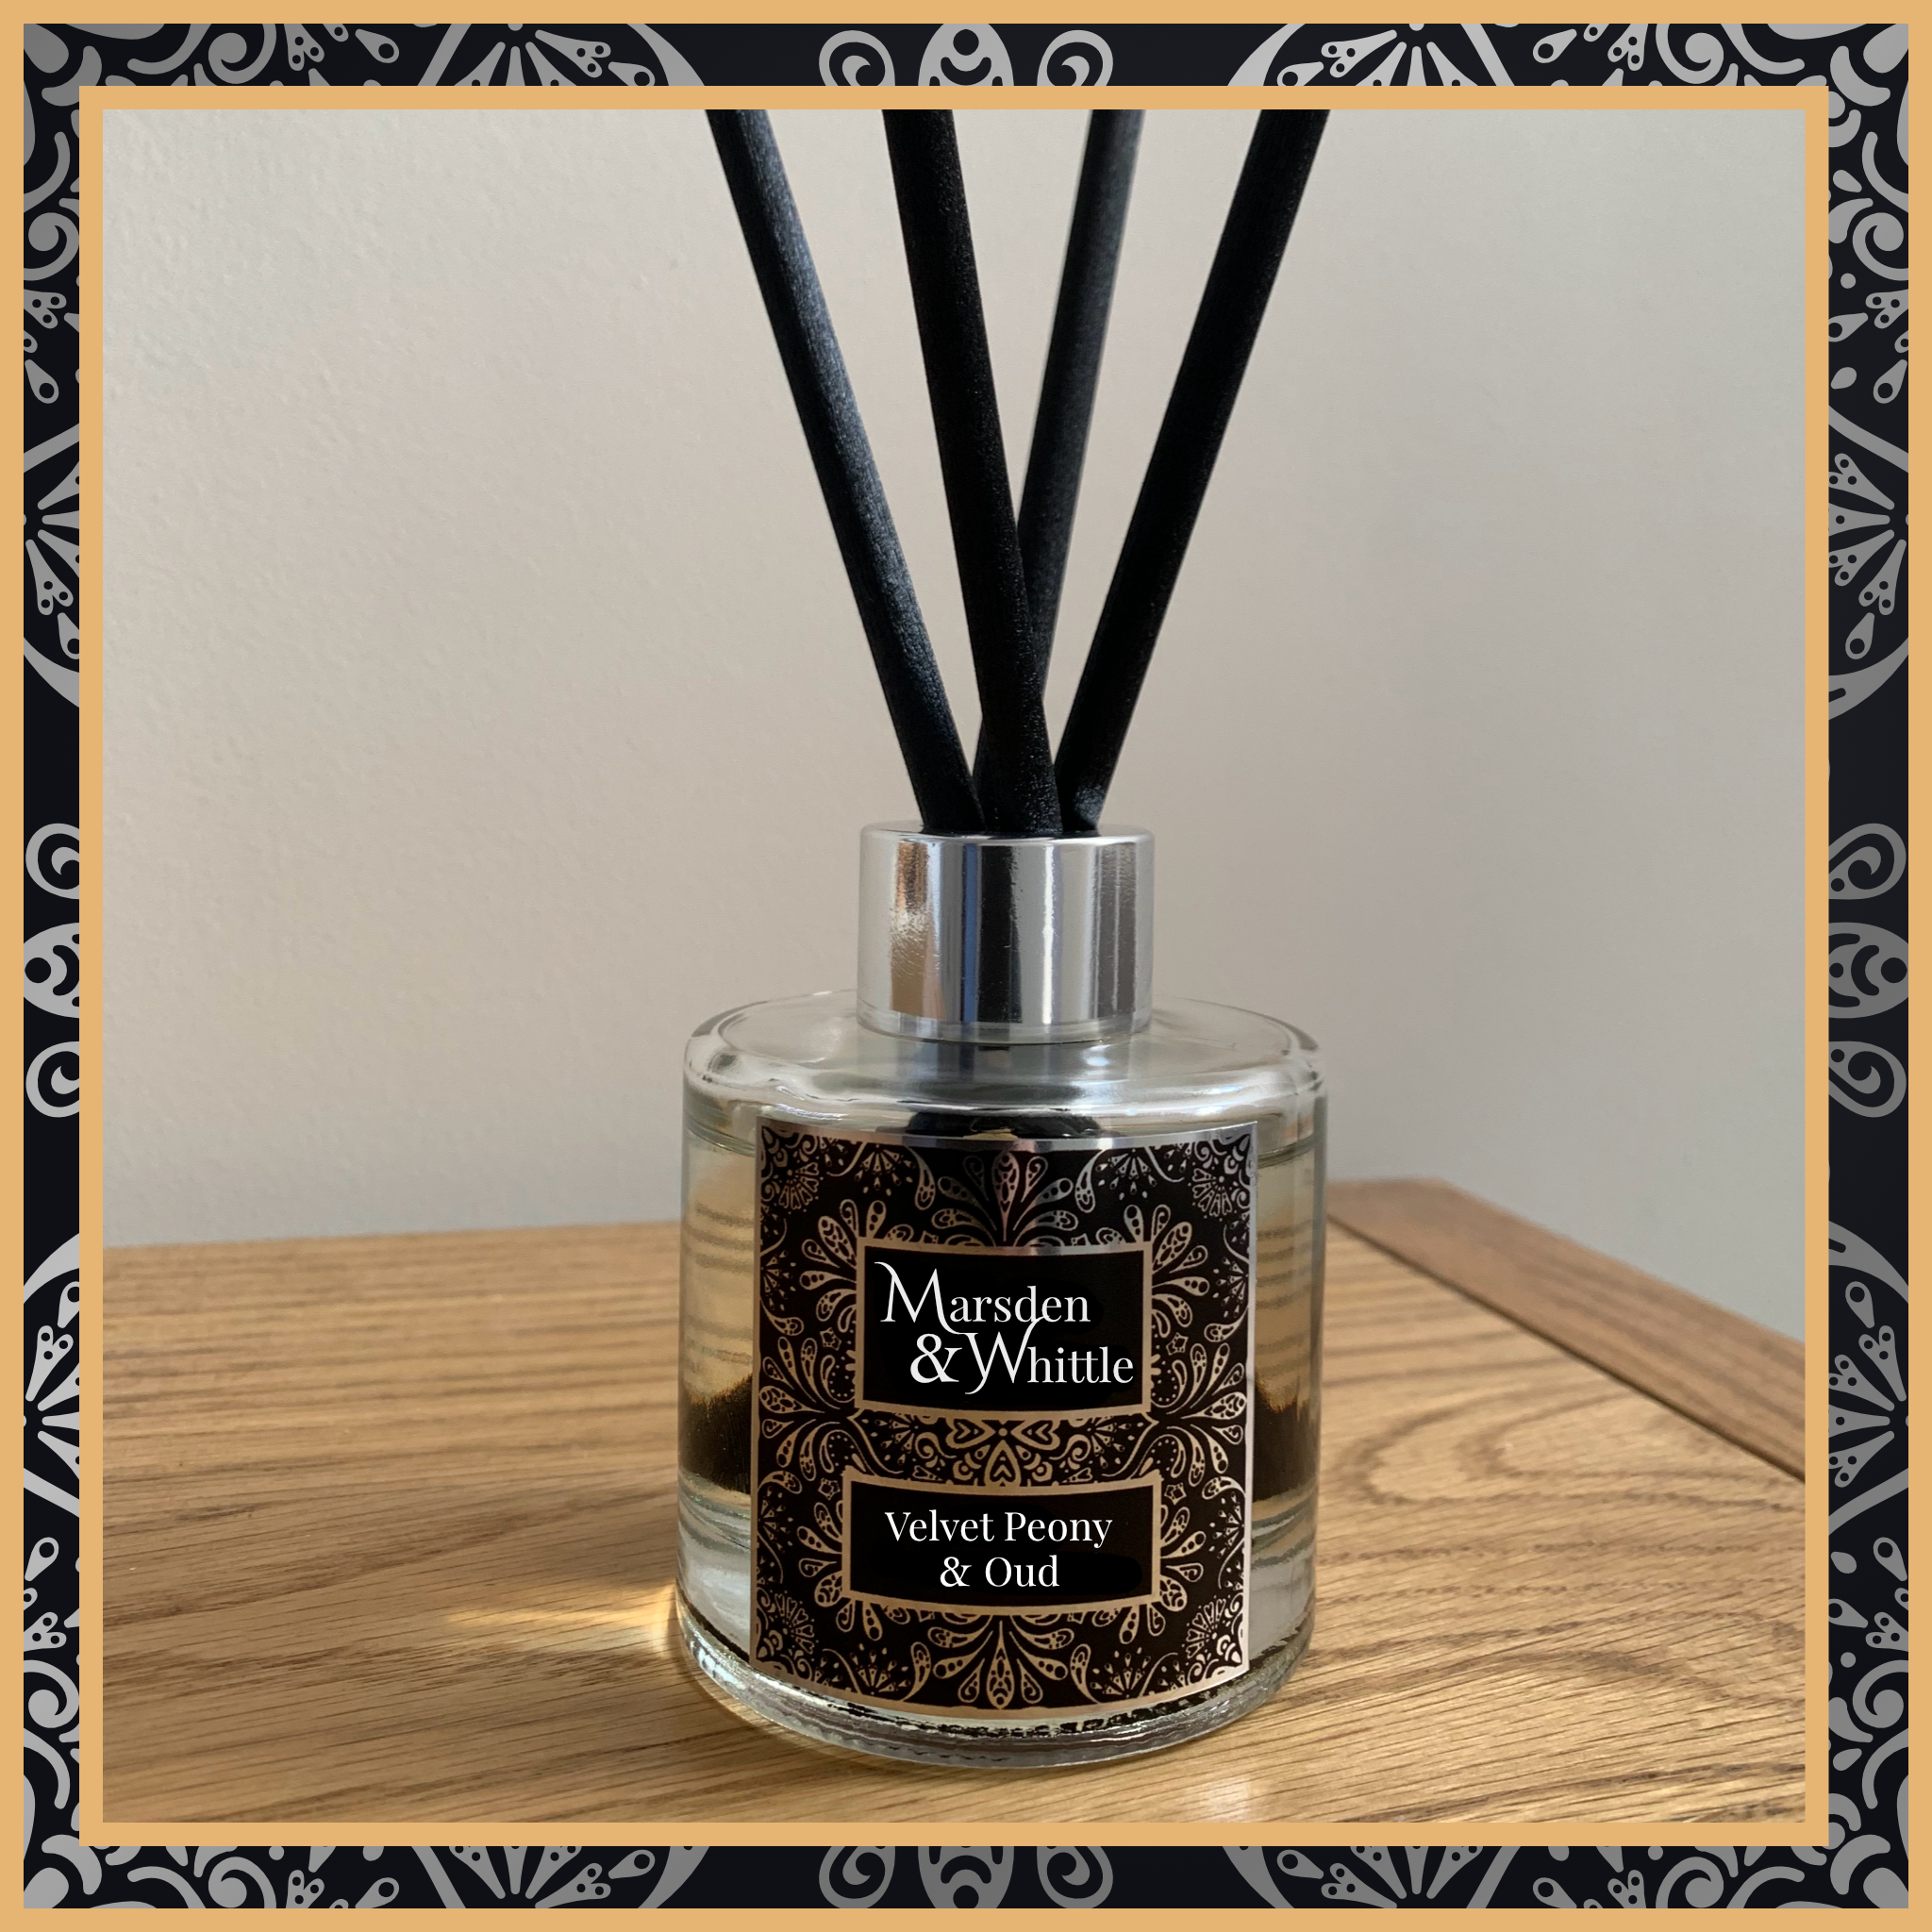 A Velvet Peony and Oud glass reed diffuser with black reeds and a silver chrome cap sitting on a wooden table.